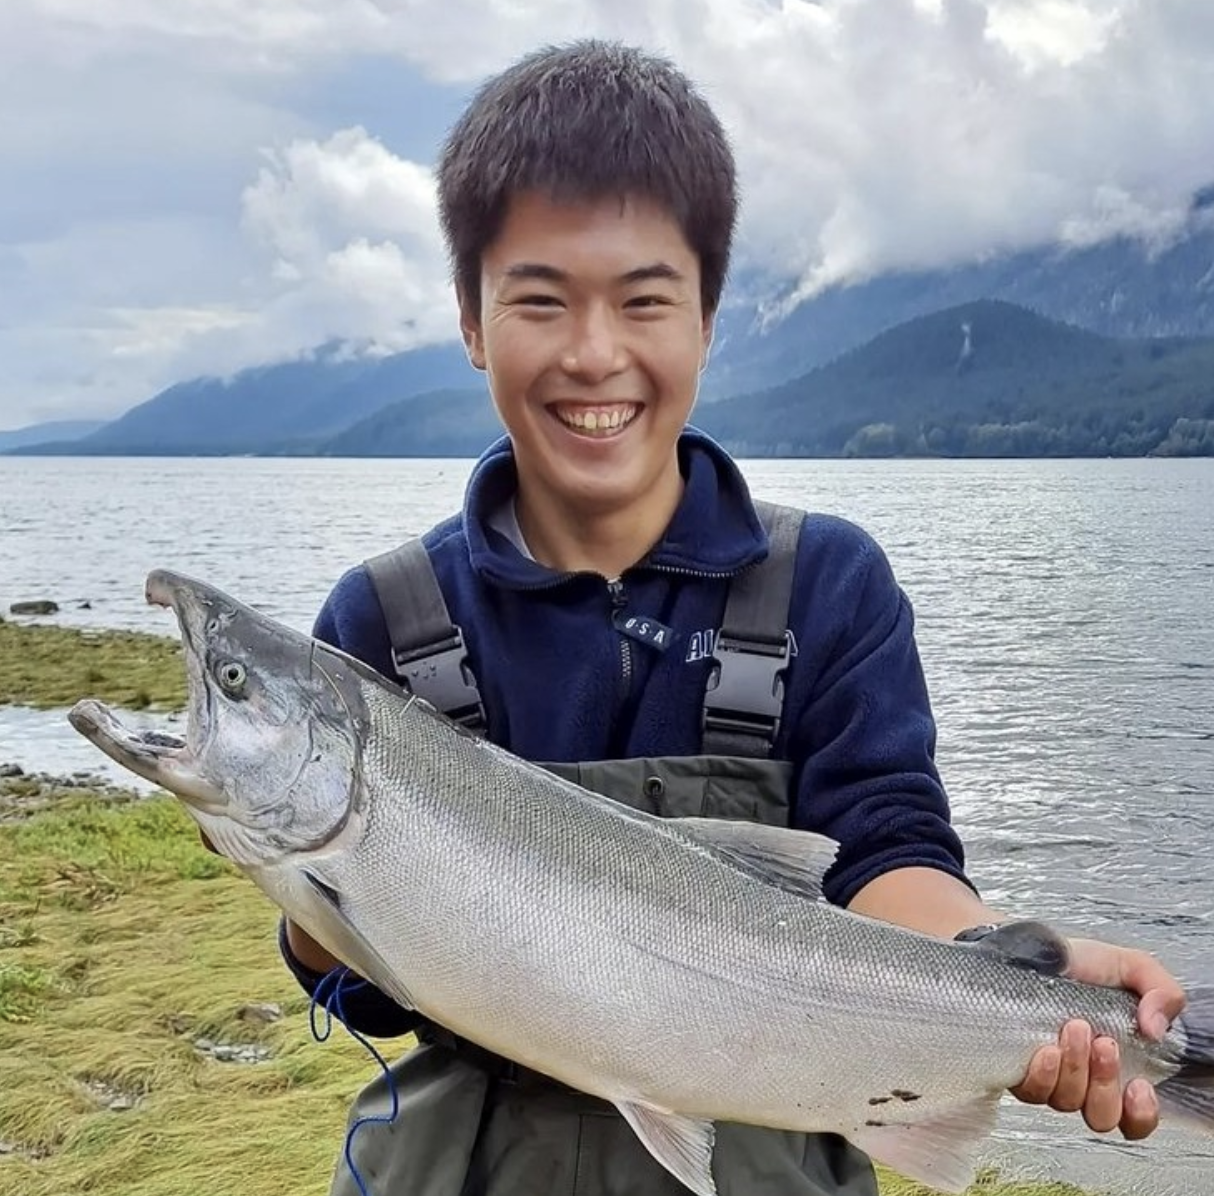 Young person holding a fish and smiling, water and mountain in background.